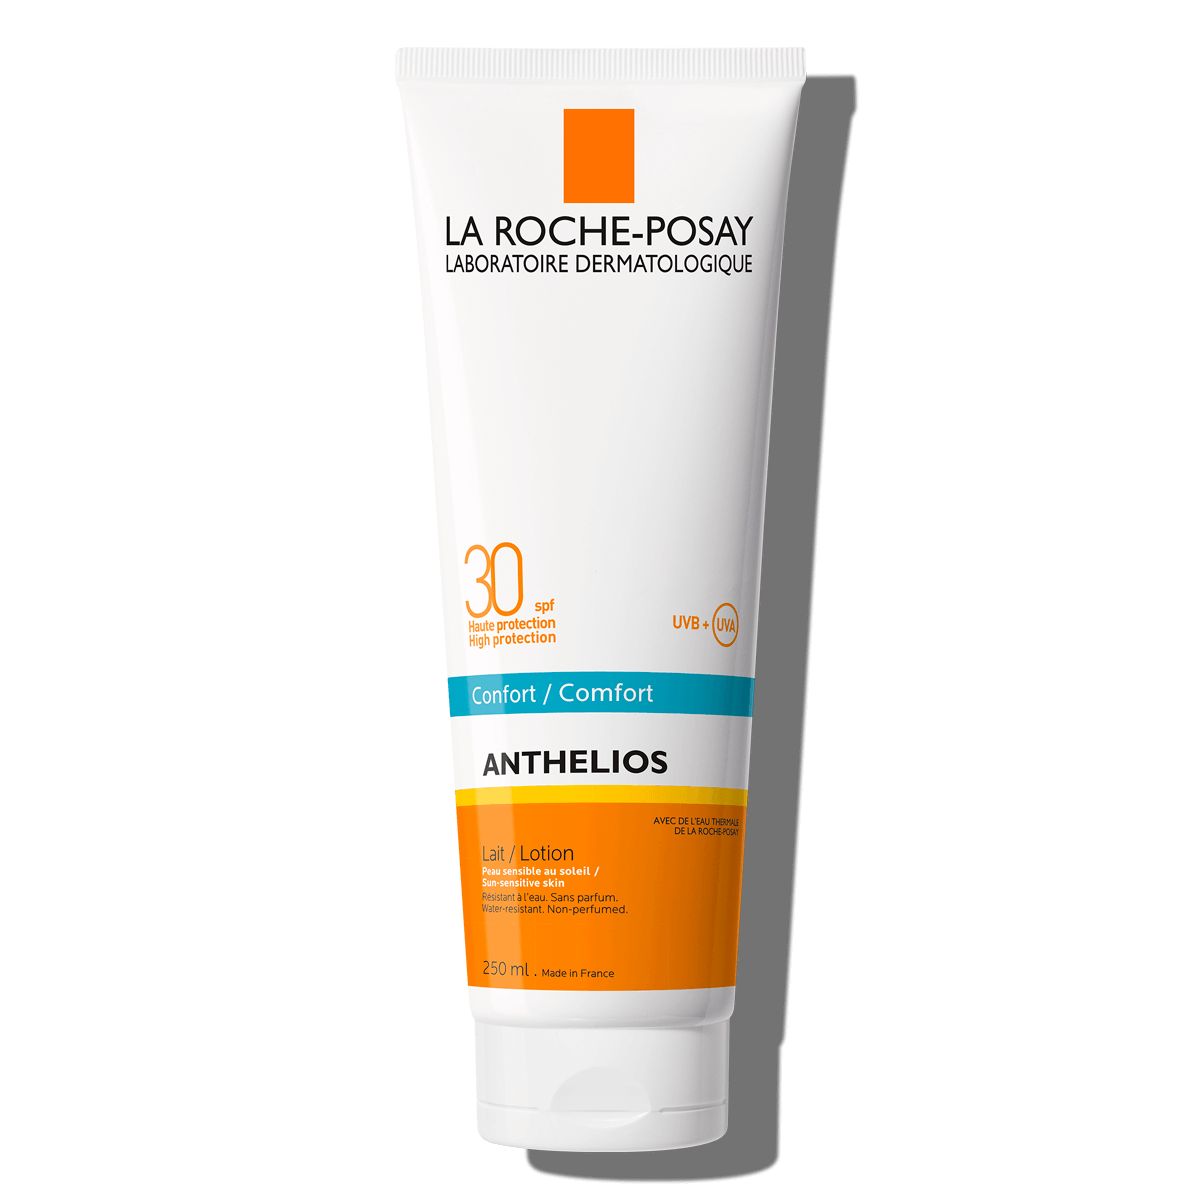 La Roche Posay ProductPage Sun Anthelios Smooth Lotion Spf30 250ml 333